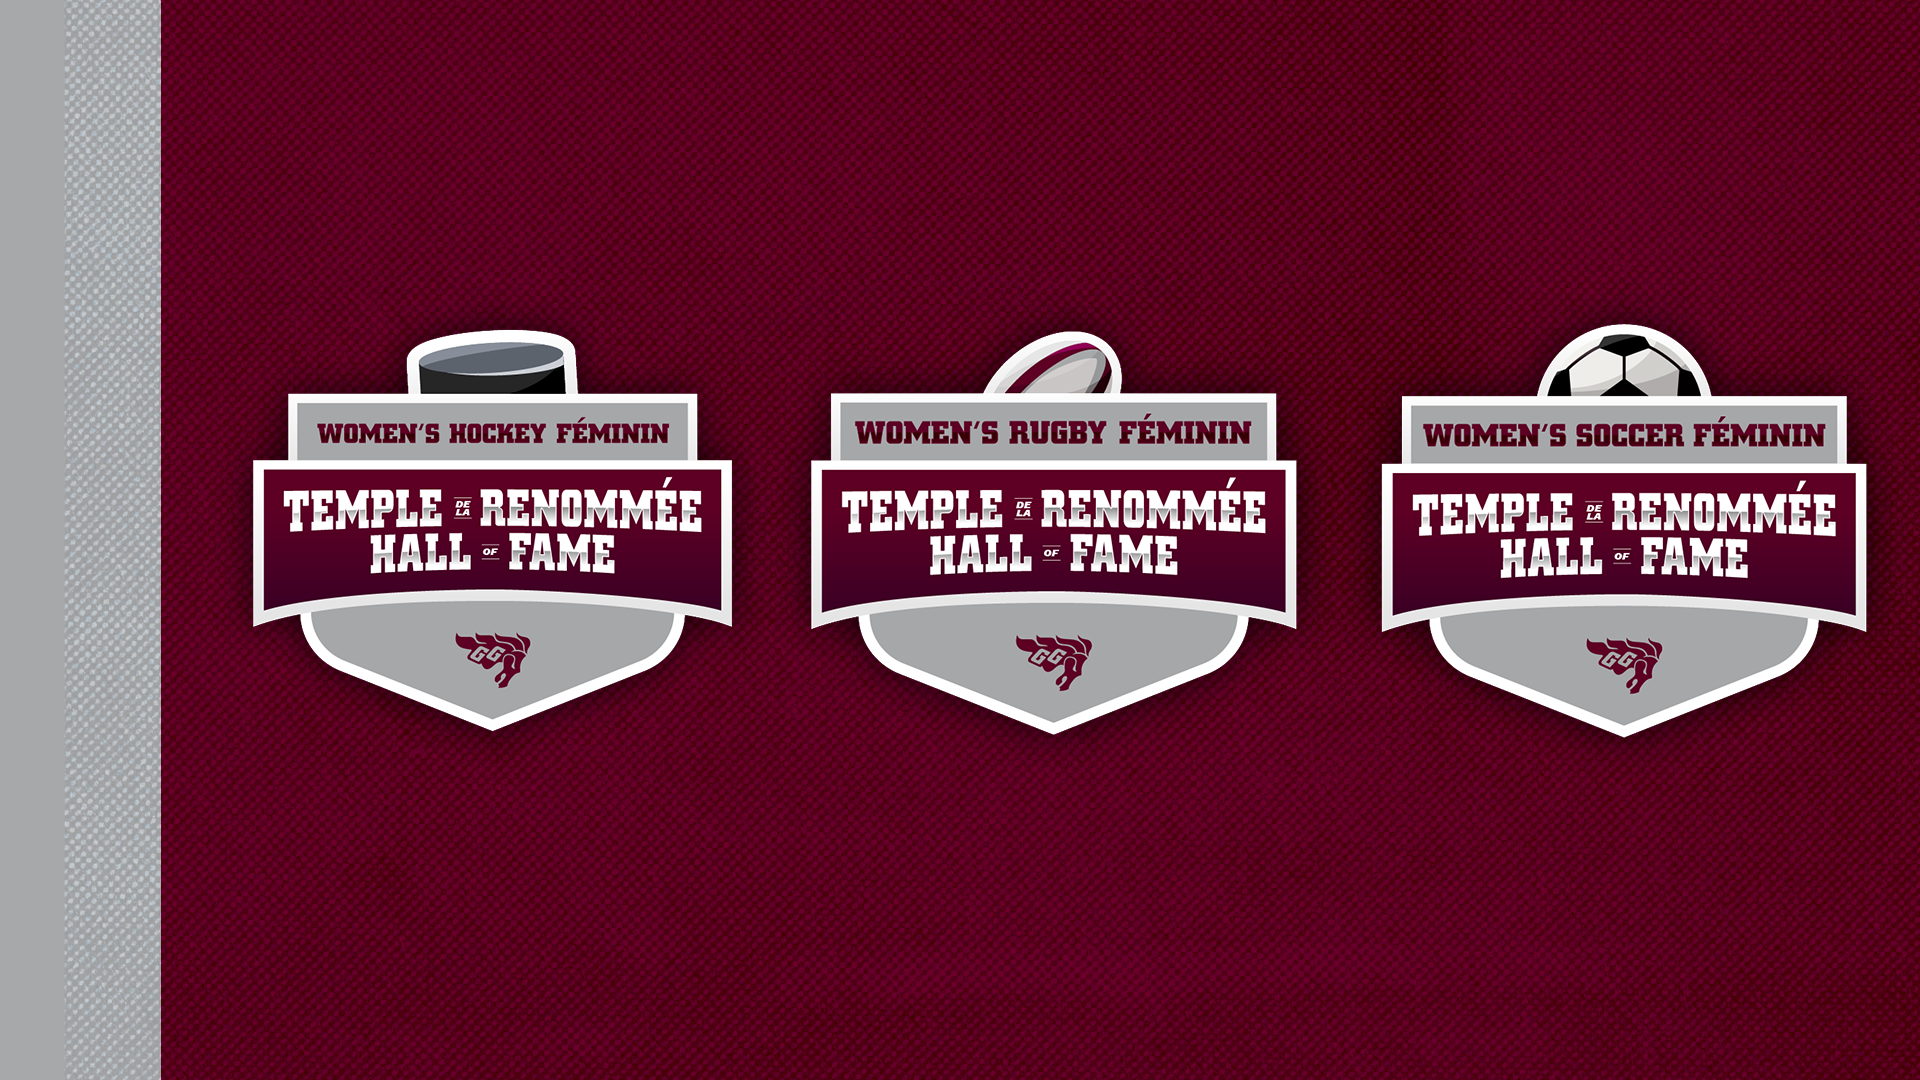 Logo badges for Gee-Gees women's hockey Hall of Fame, Gee-Gees women's rugby Hall of Fame, Gee-Gees women's soccer Hall of Fame. Thumbnail